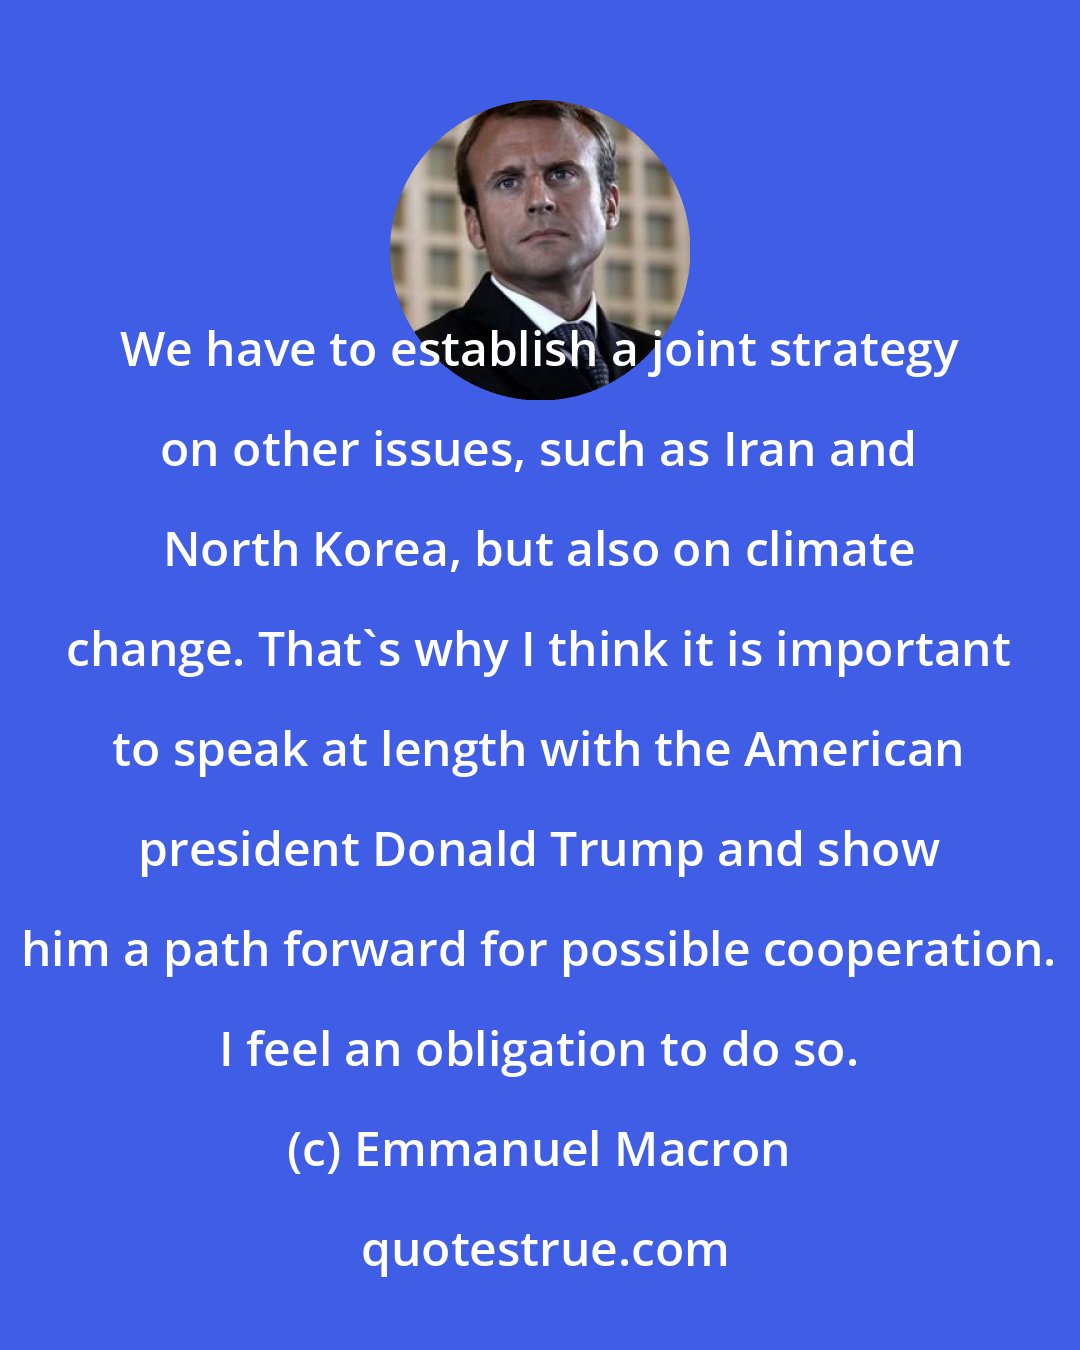 Emmanuel Macron: We have to establish a joint strategy on other issues, such as Iran and North Korea, but also on climate change. That's why I think it is important to speak at length with the American president Donald Trump and show him a path forward for possible cooperation. I feel an obligation to do so.